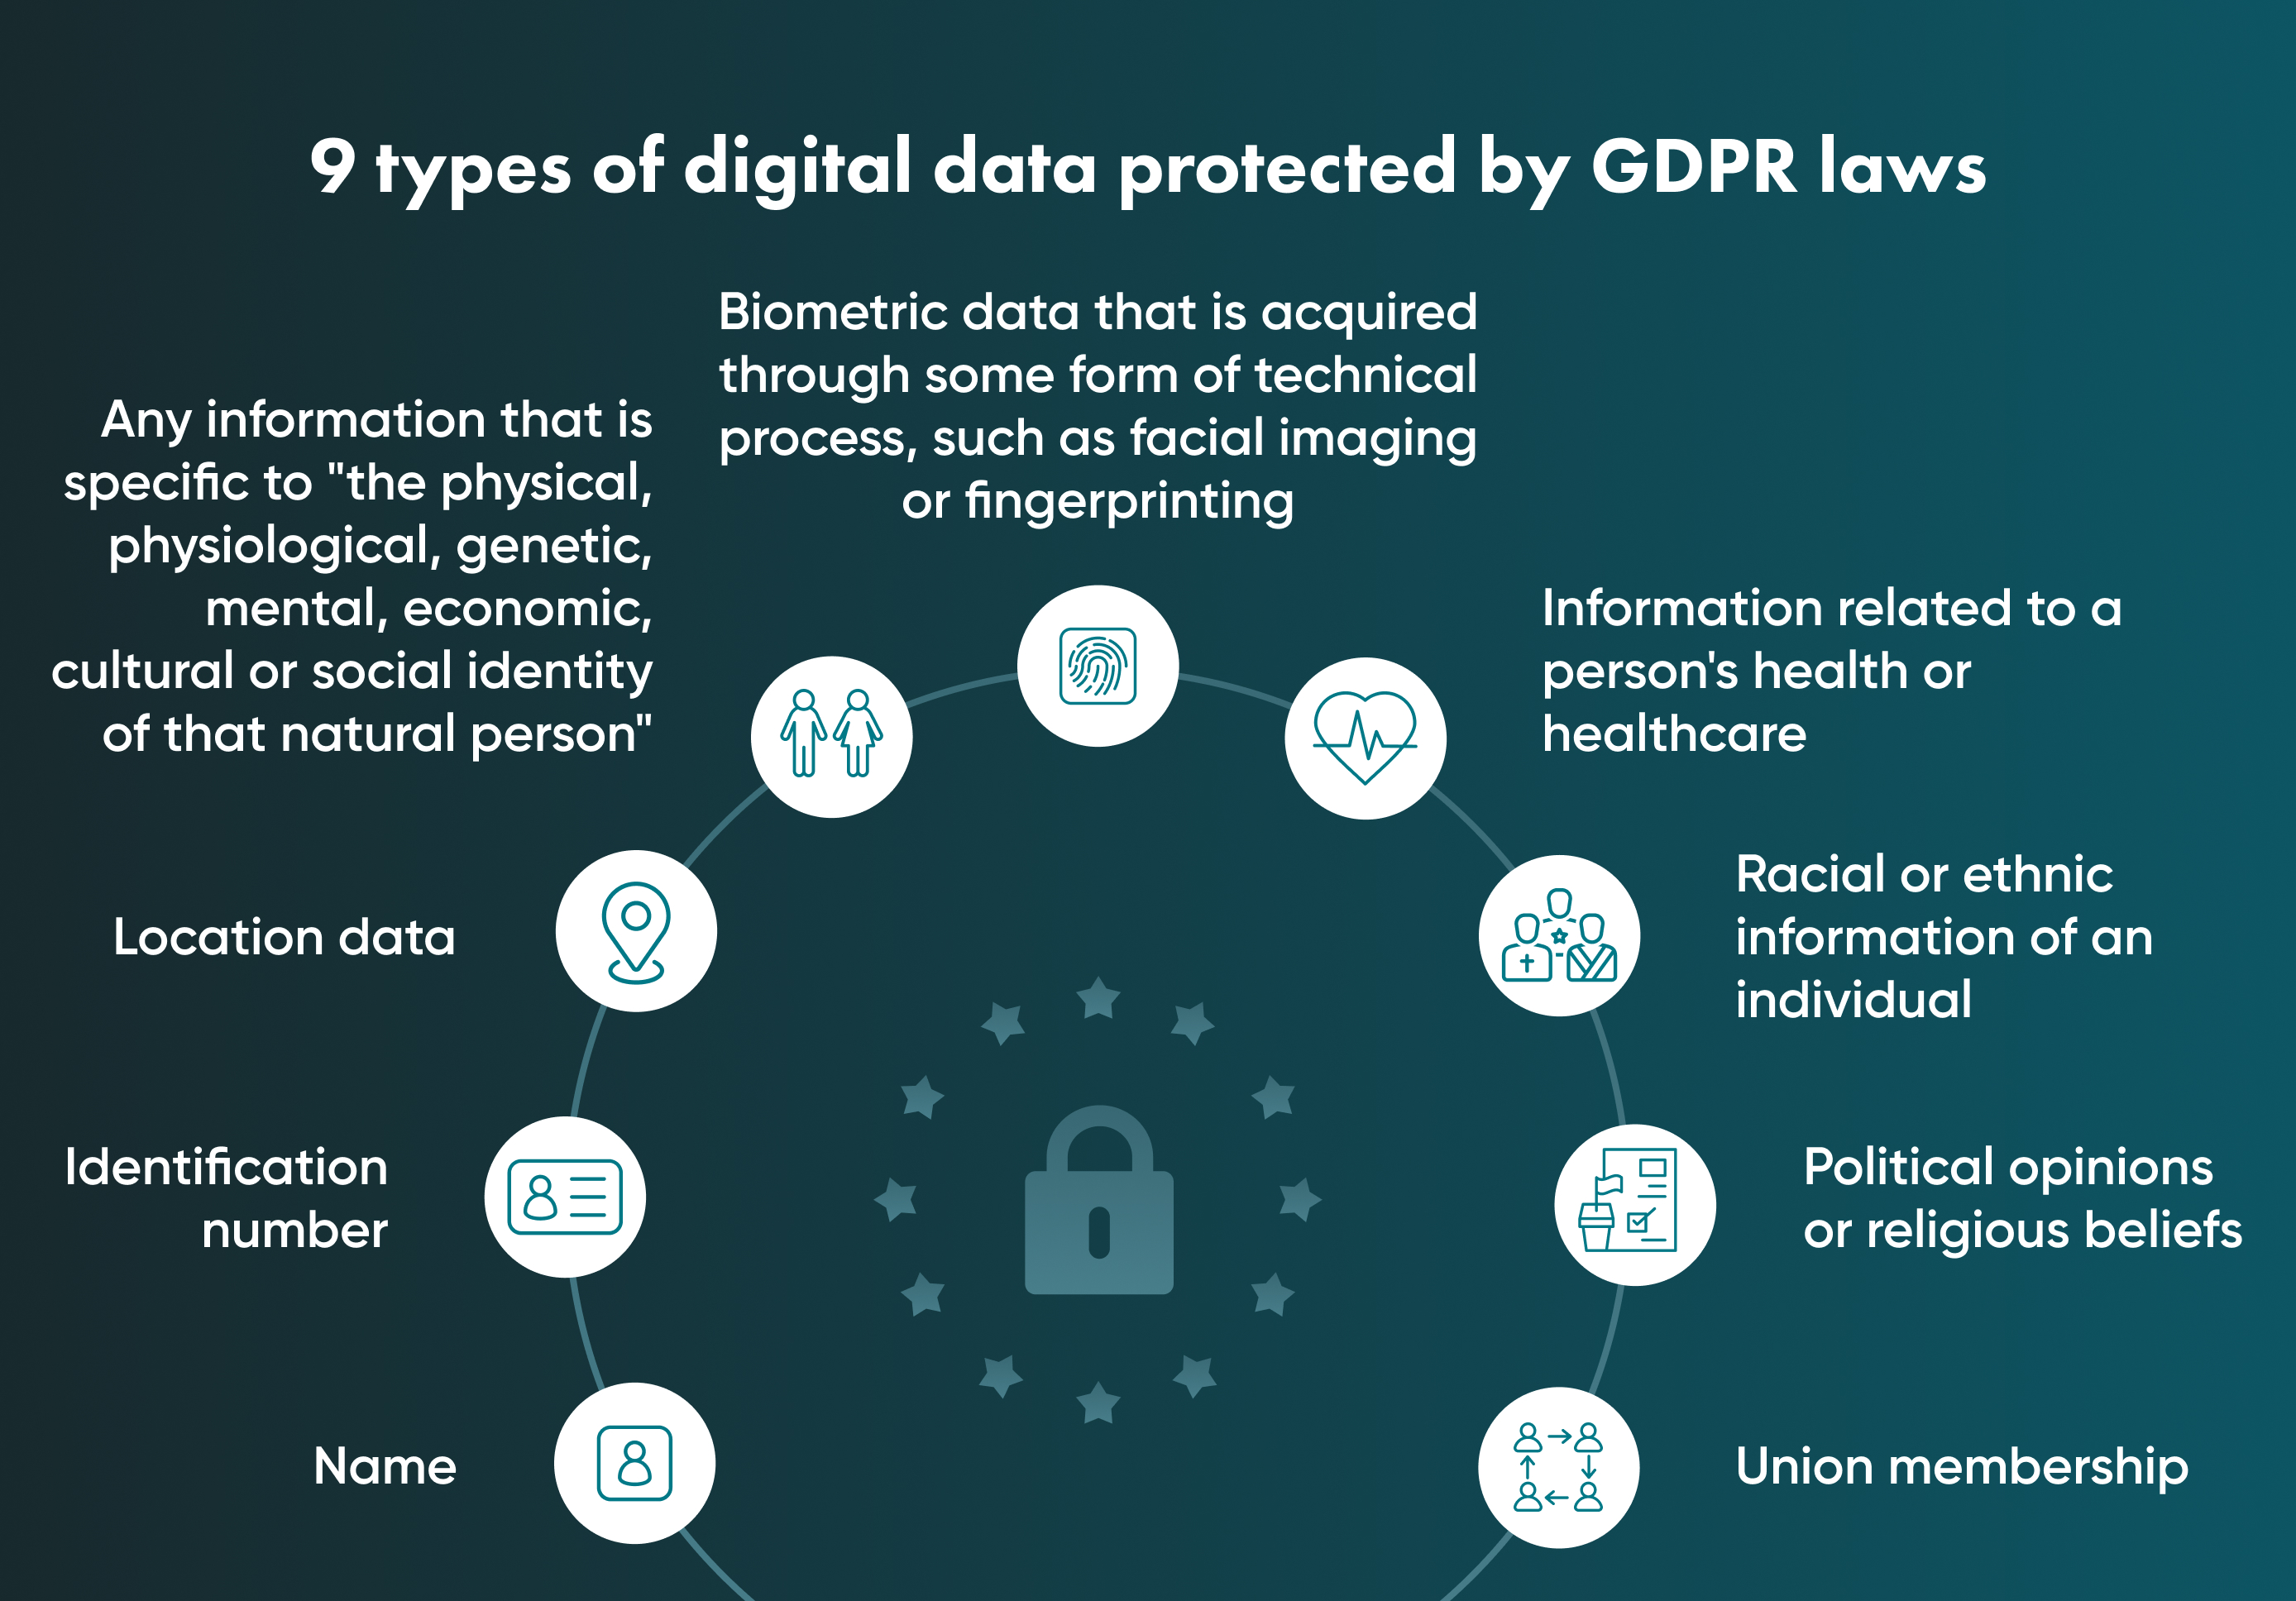 Demonstration of adherence to the principles of GDPR compliance